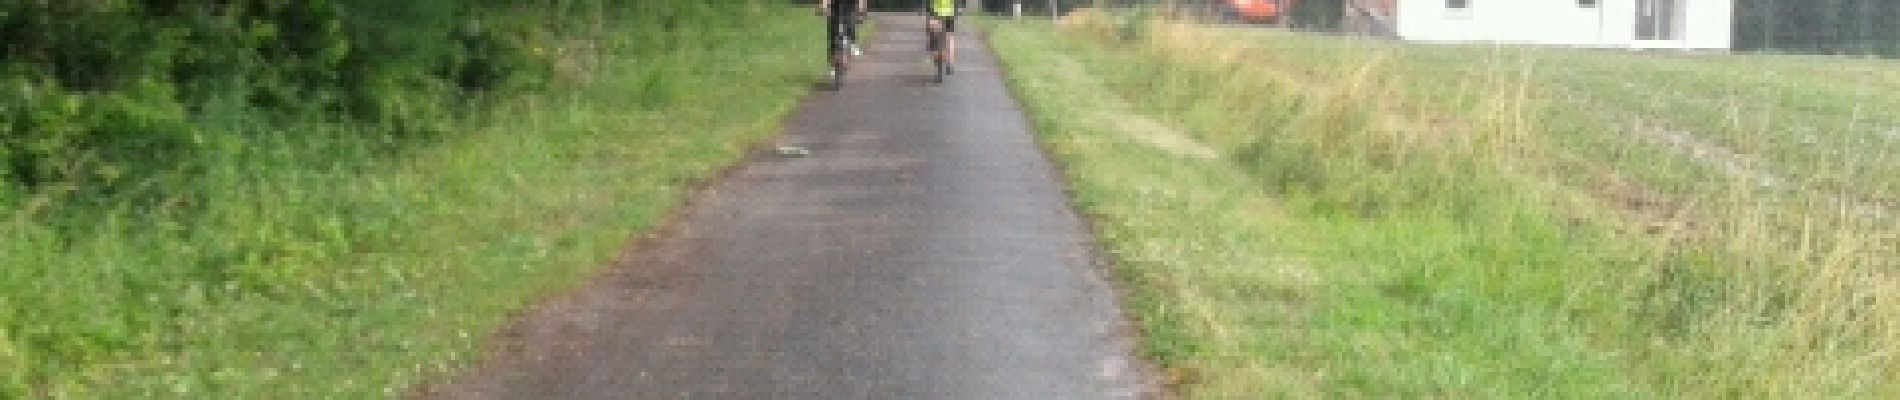 Tocht Mountainbike Montreuil-Bellay - 2012-07-14 13h35m46 - Photo